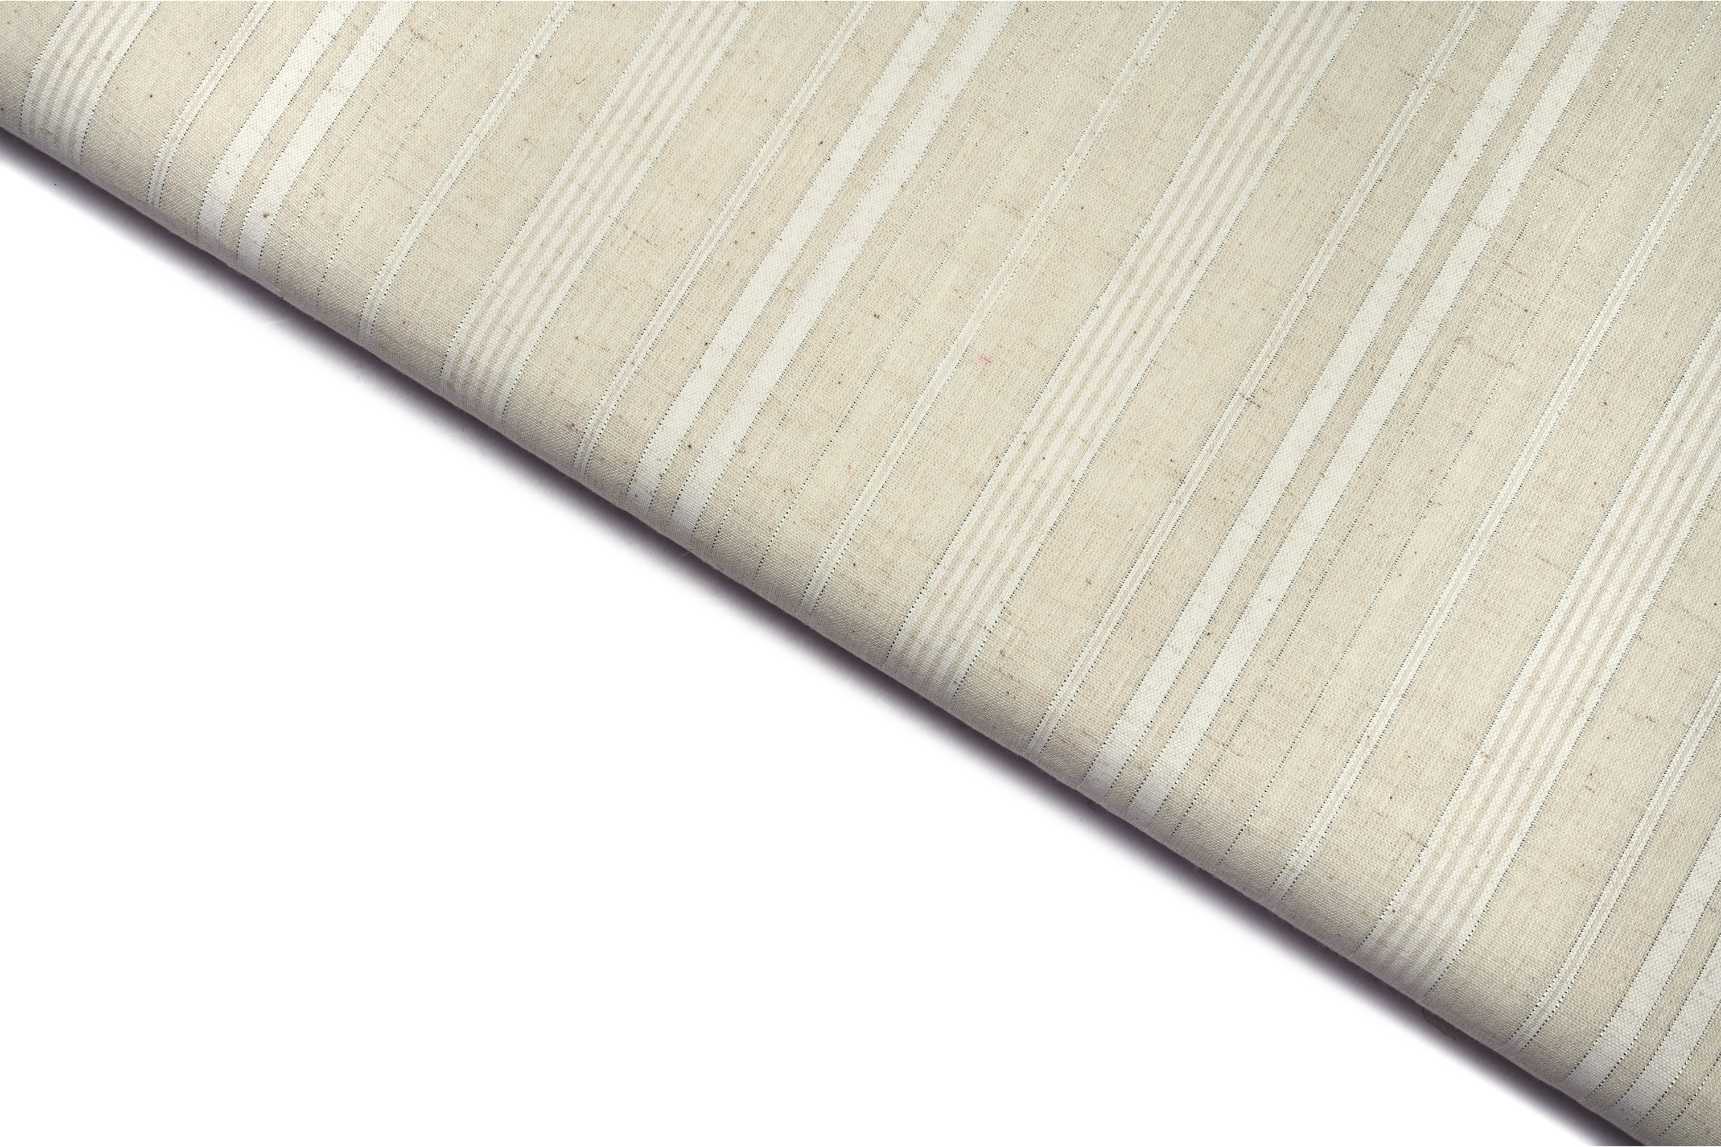 ZOOT CREAM COLOR TUSSER WEAVE & METALIC SILVER LINES PATTERN SOUTH COTTON HANDLOOM FABRIC 11673